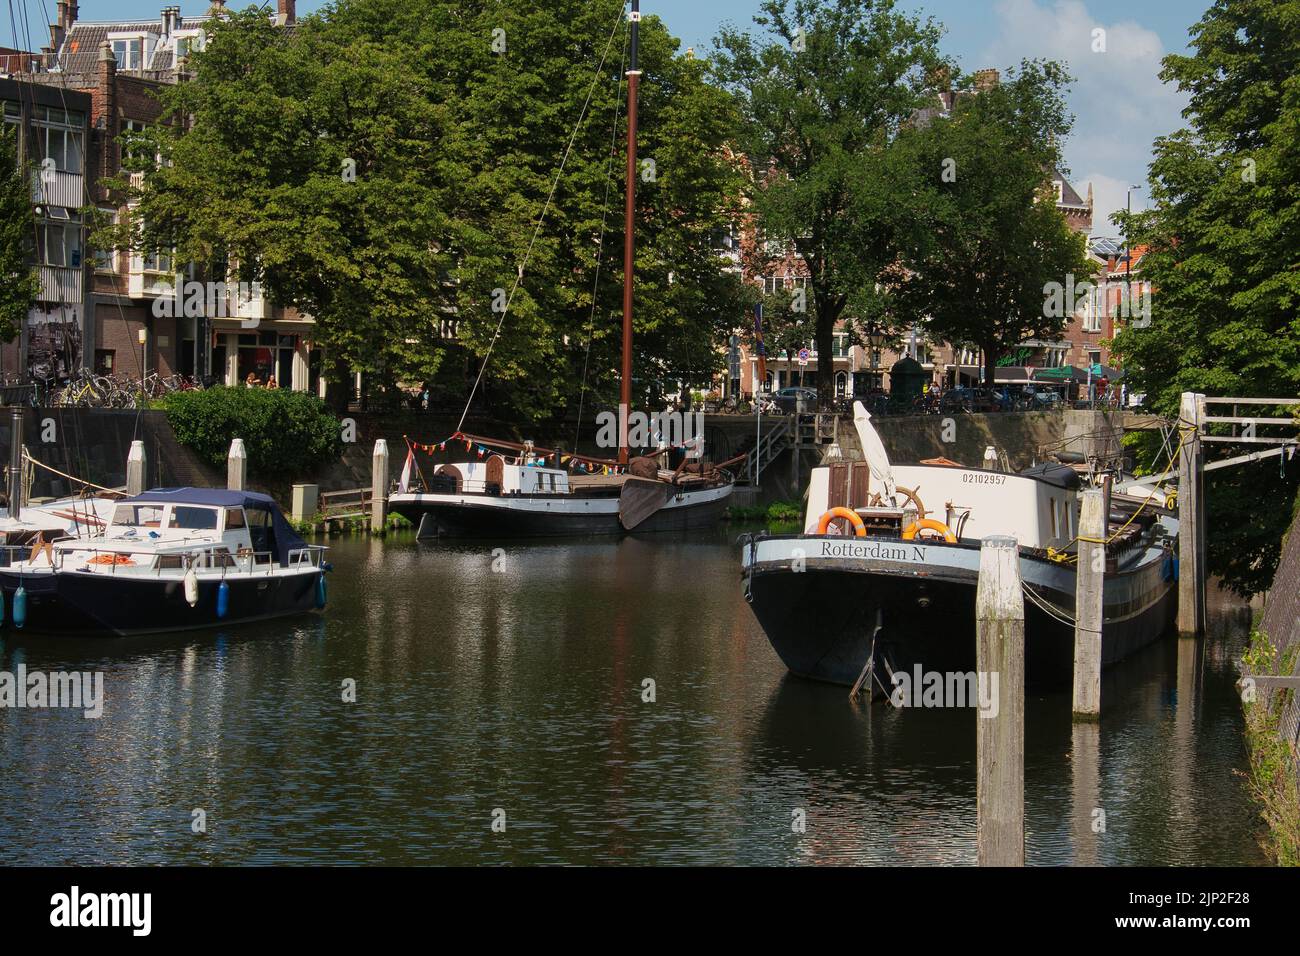 Moored boats on the river in Schiedam, the Netherlands Stock Photo